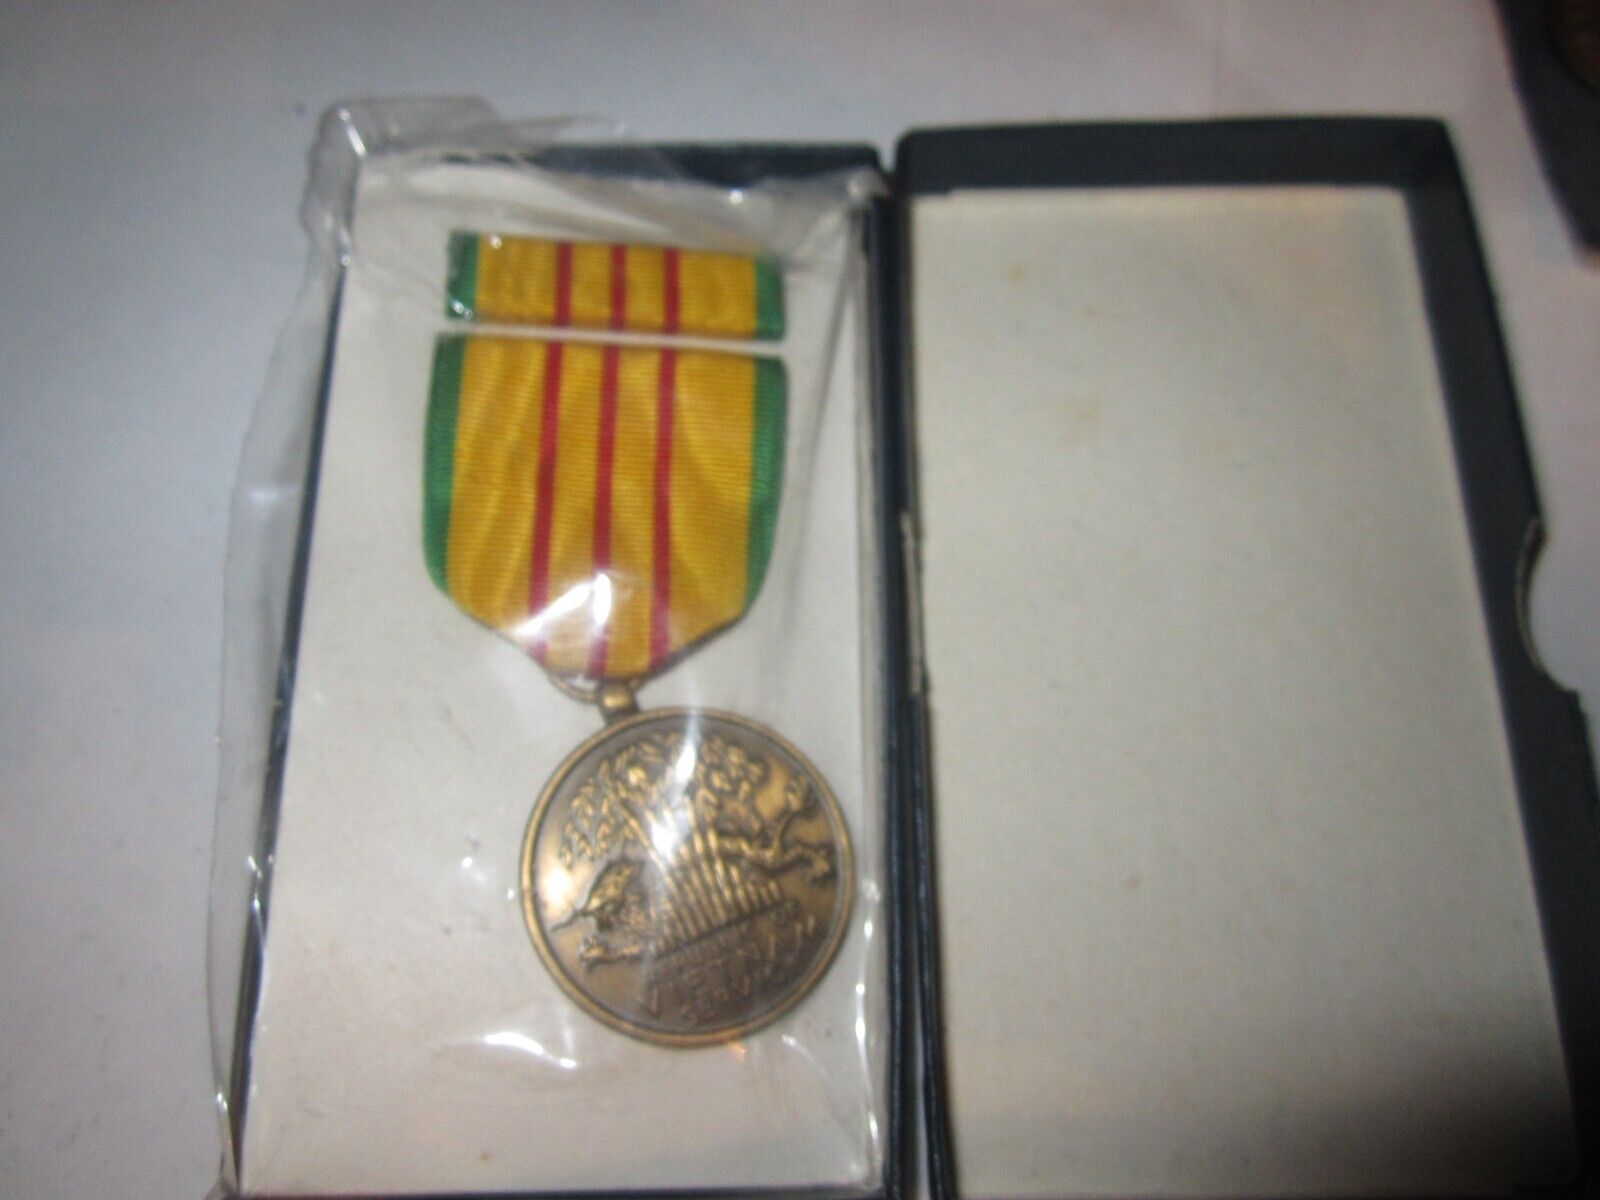 NEW ORIGINAL VIETNAM SERVICE MEDAL SET IN MILITARY GI ISSUE BOX Dated 1969